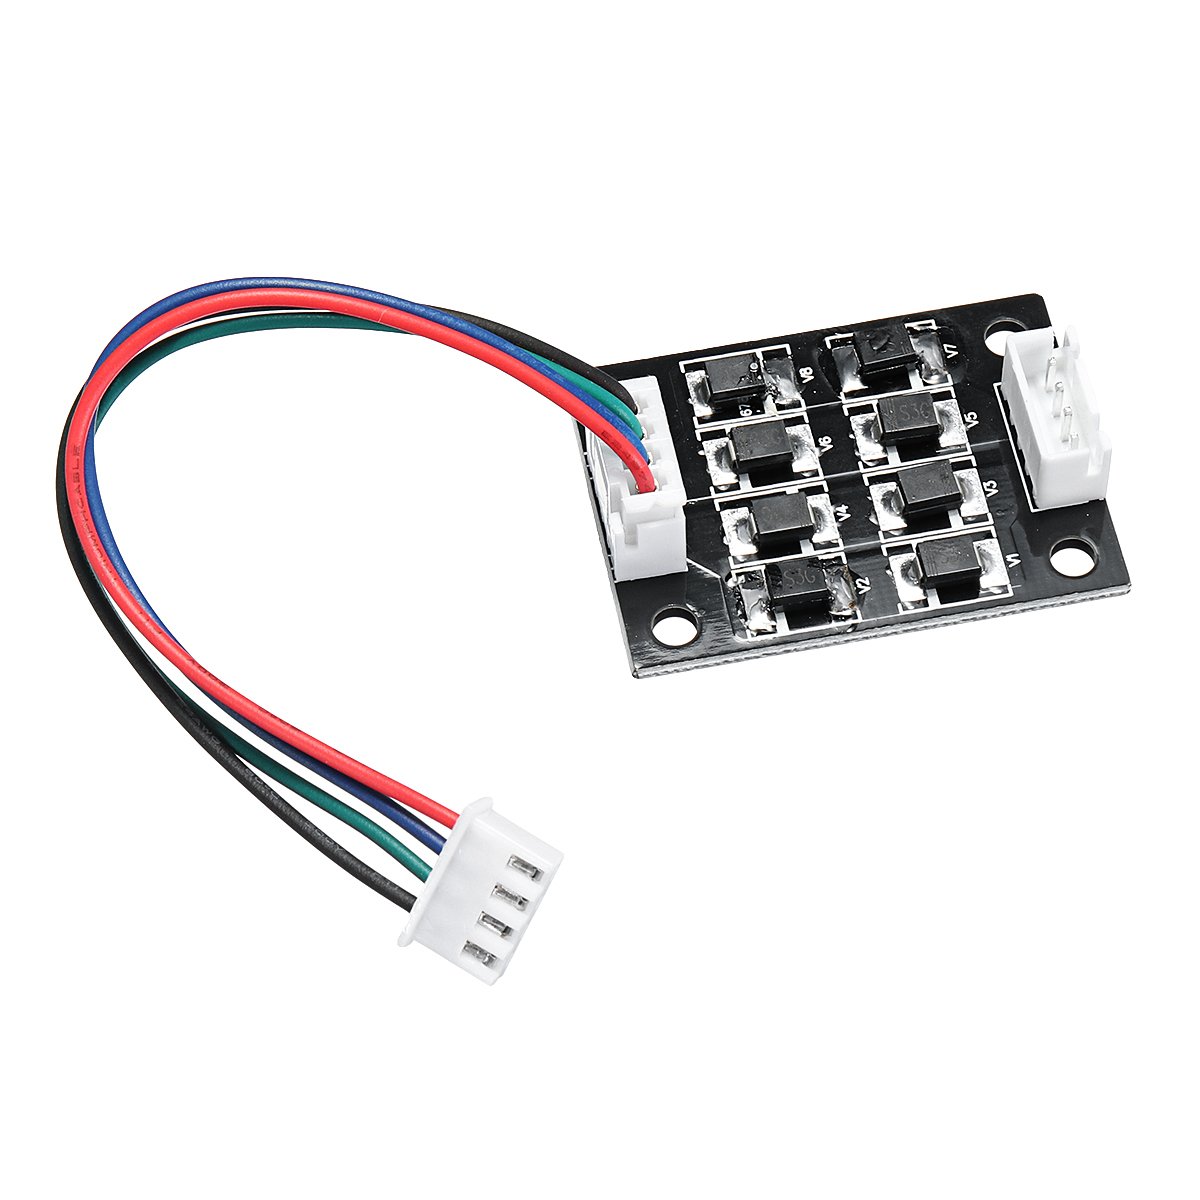 TL-Smoother Addon Module With Dupont Line For 3D Printer Stepper Motor 2